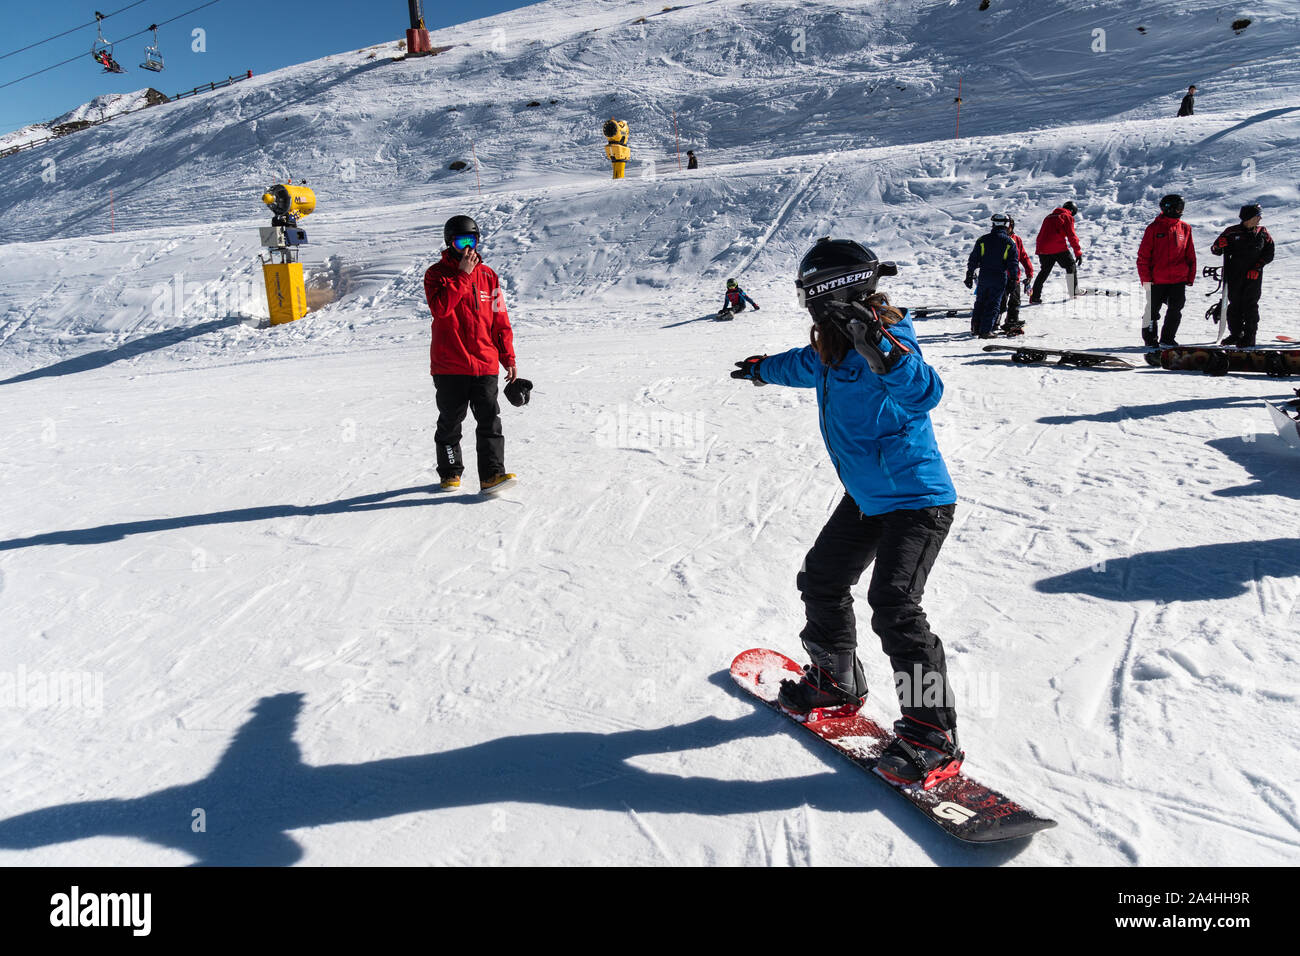 Queenstown, New Zealand - September 9 2019: A woman learn snowboarding with an instructor at the Coronet Peak ski resort in New Zealand south island Stock Photo